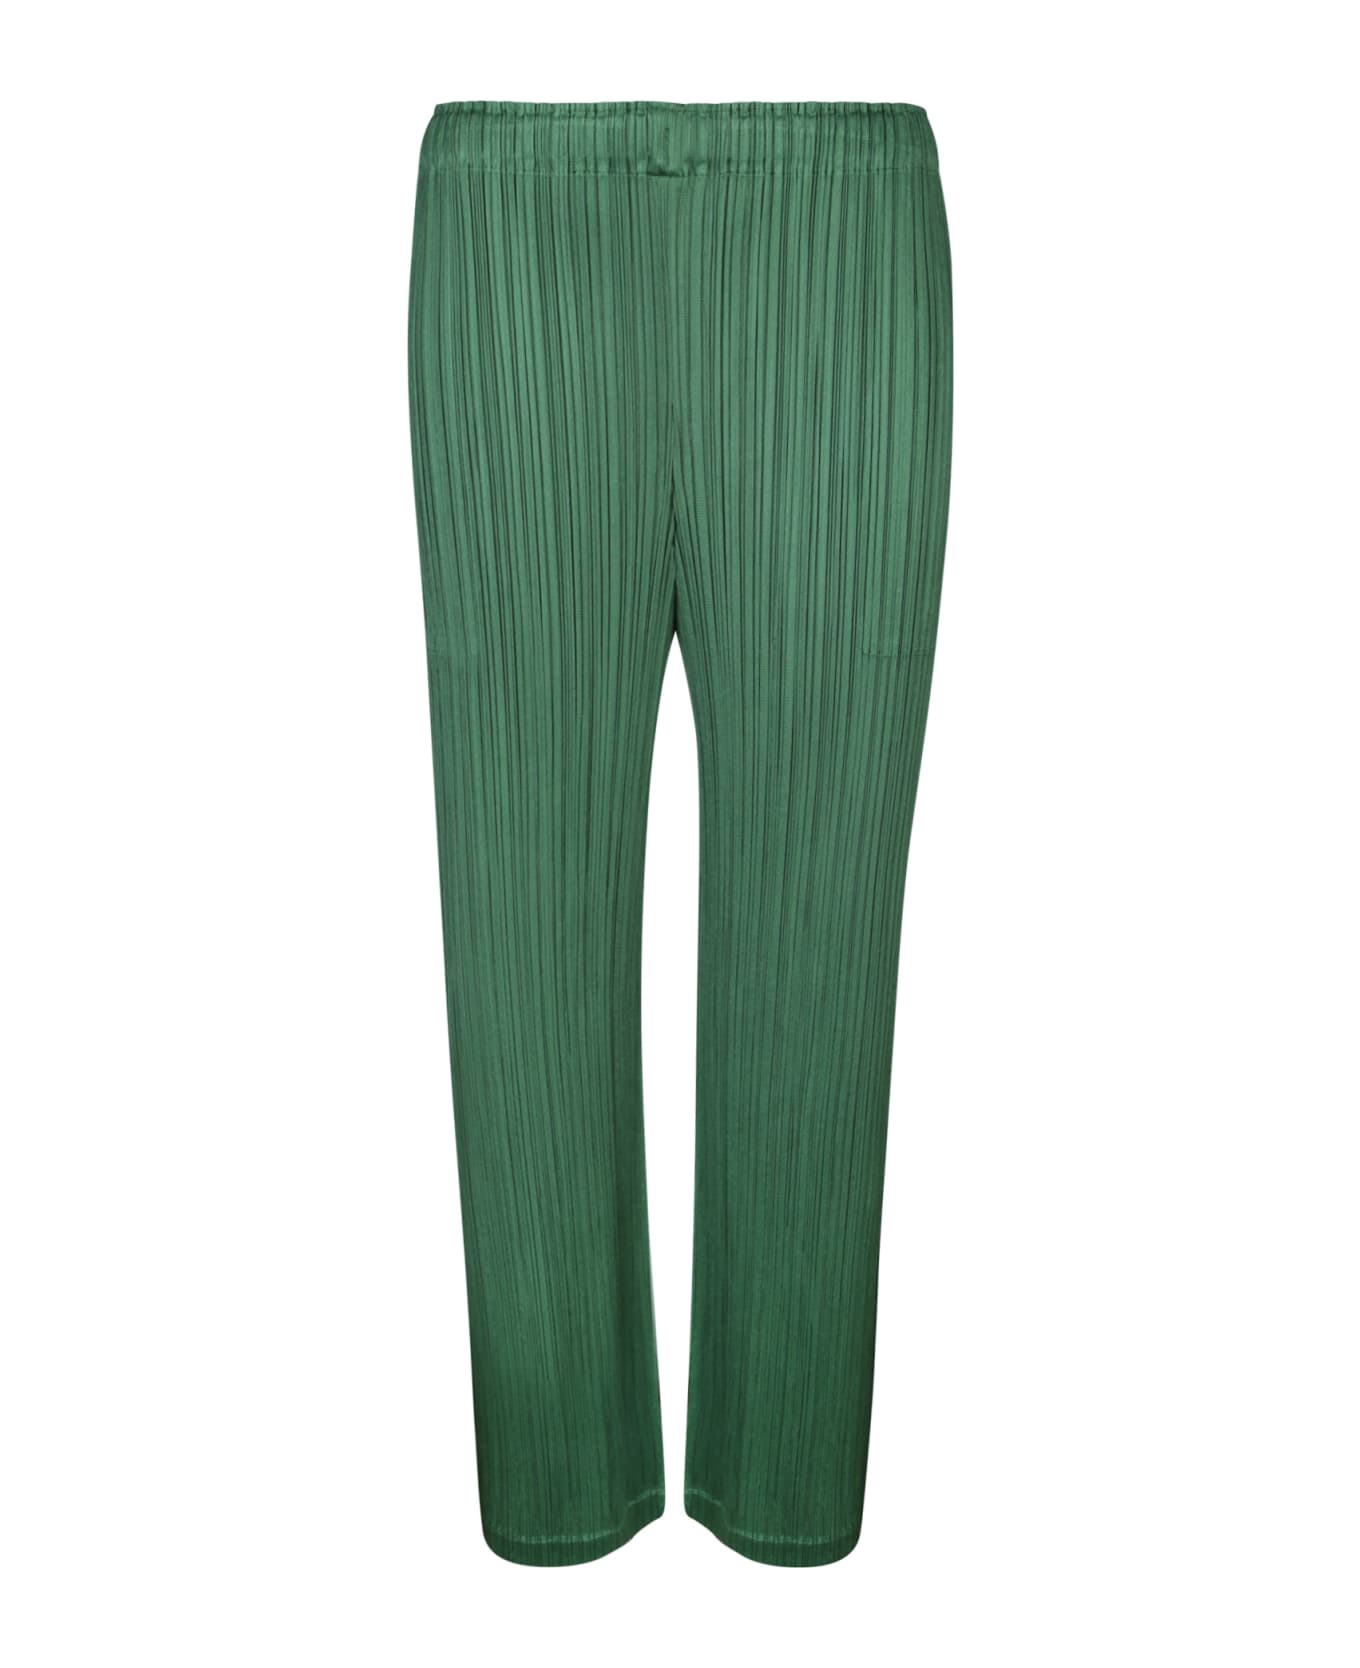 Issey Miyake Pleats Please Green Straight Trousers - Green ボトムス